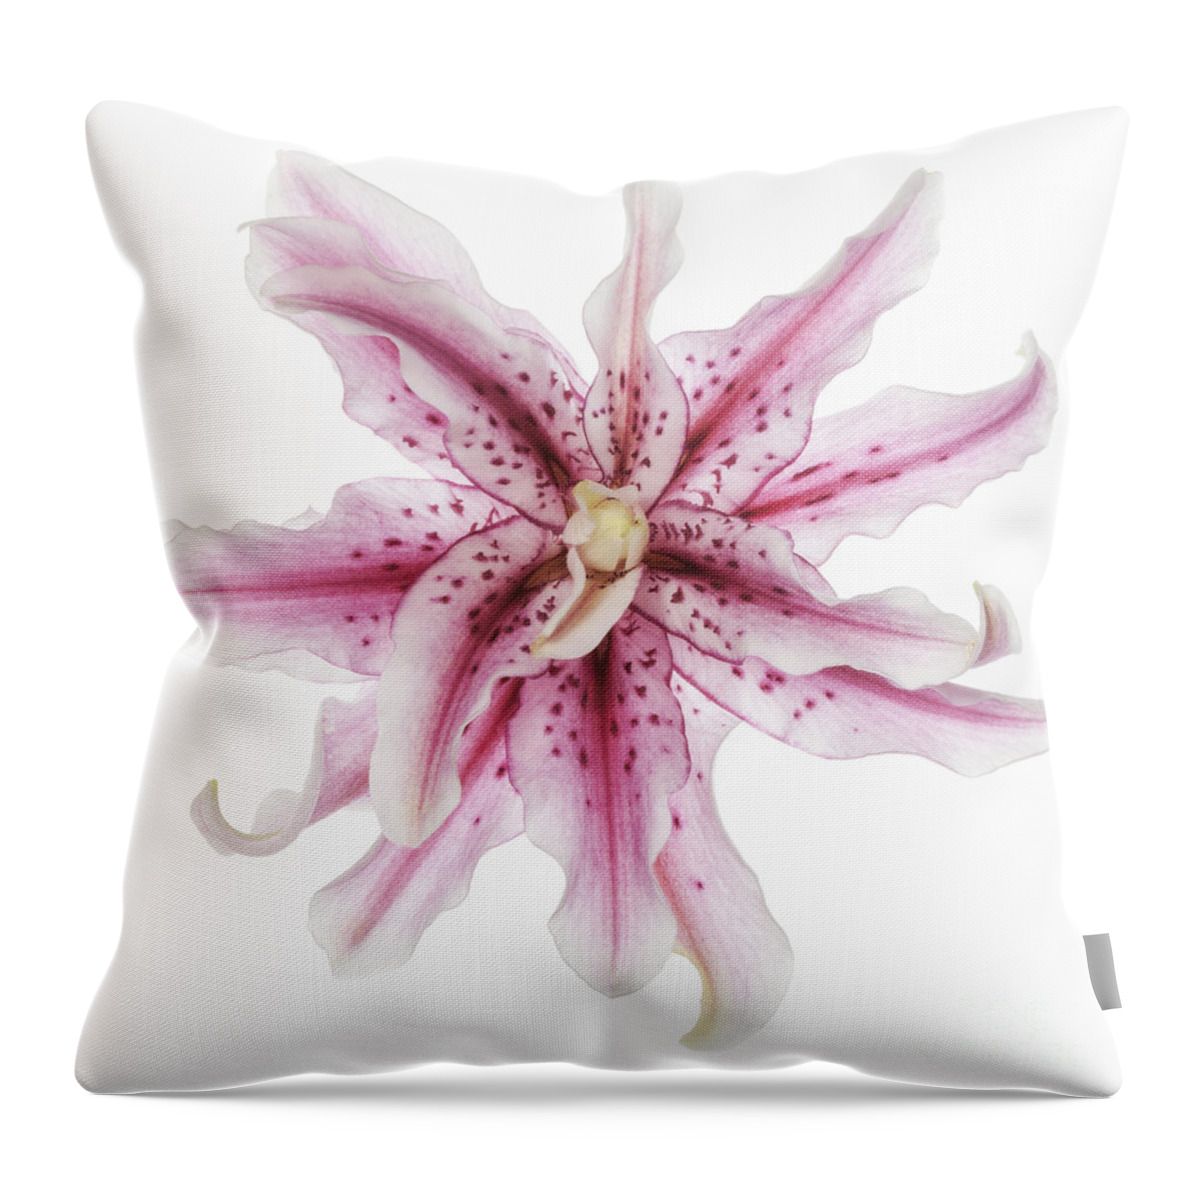 Funky Lily Throw Pillow featuring the photograph Funky Lily by Patty Colabuono